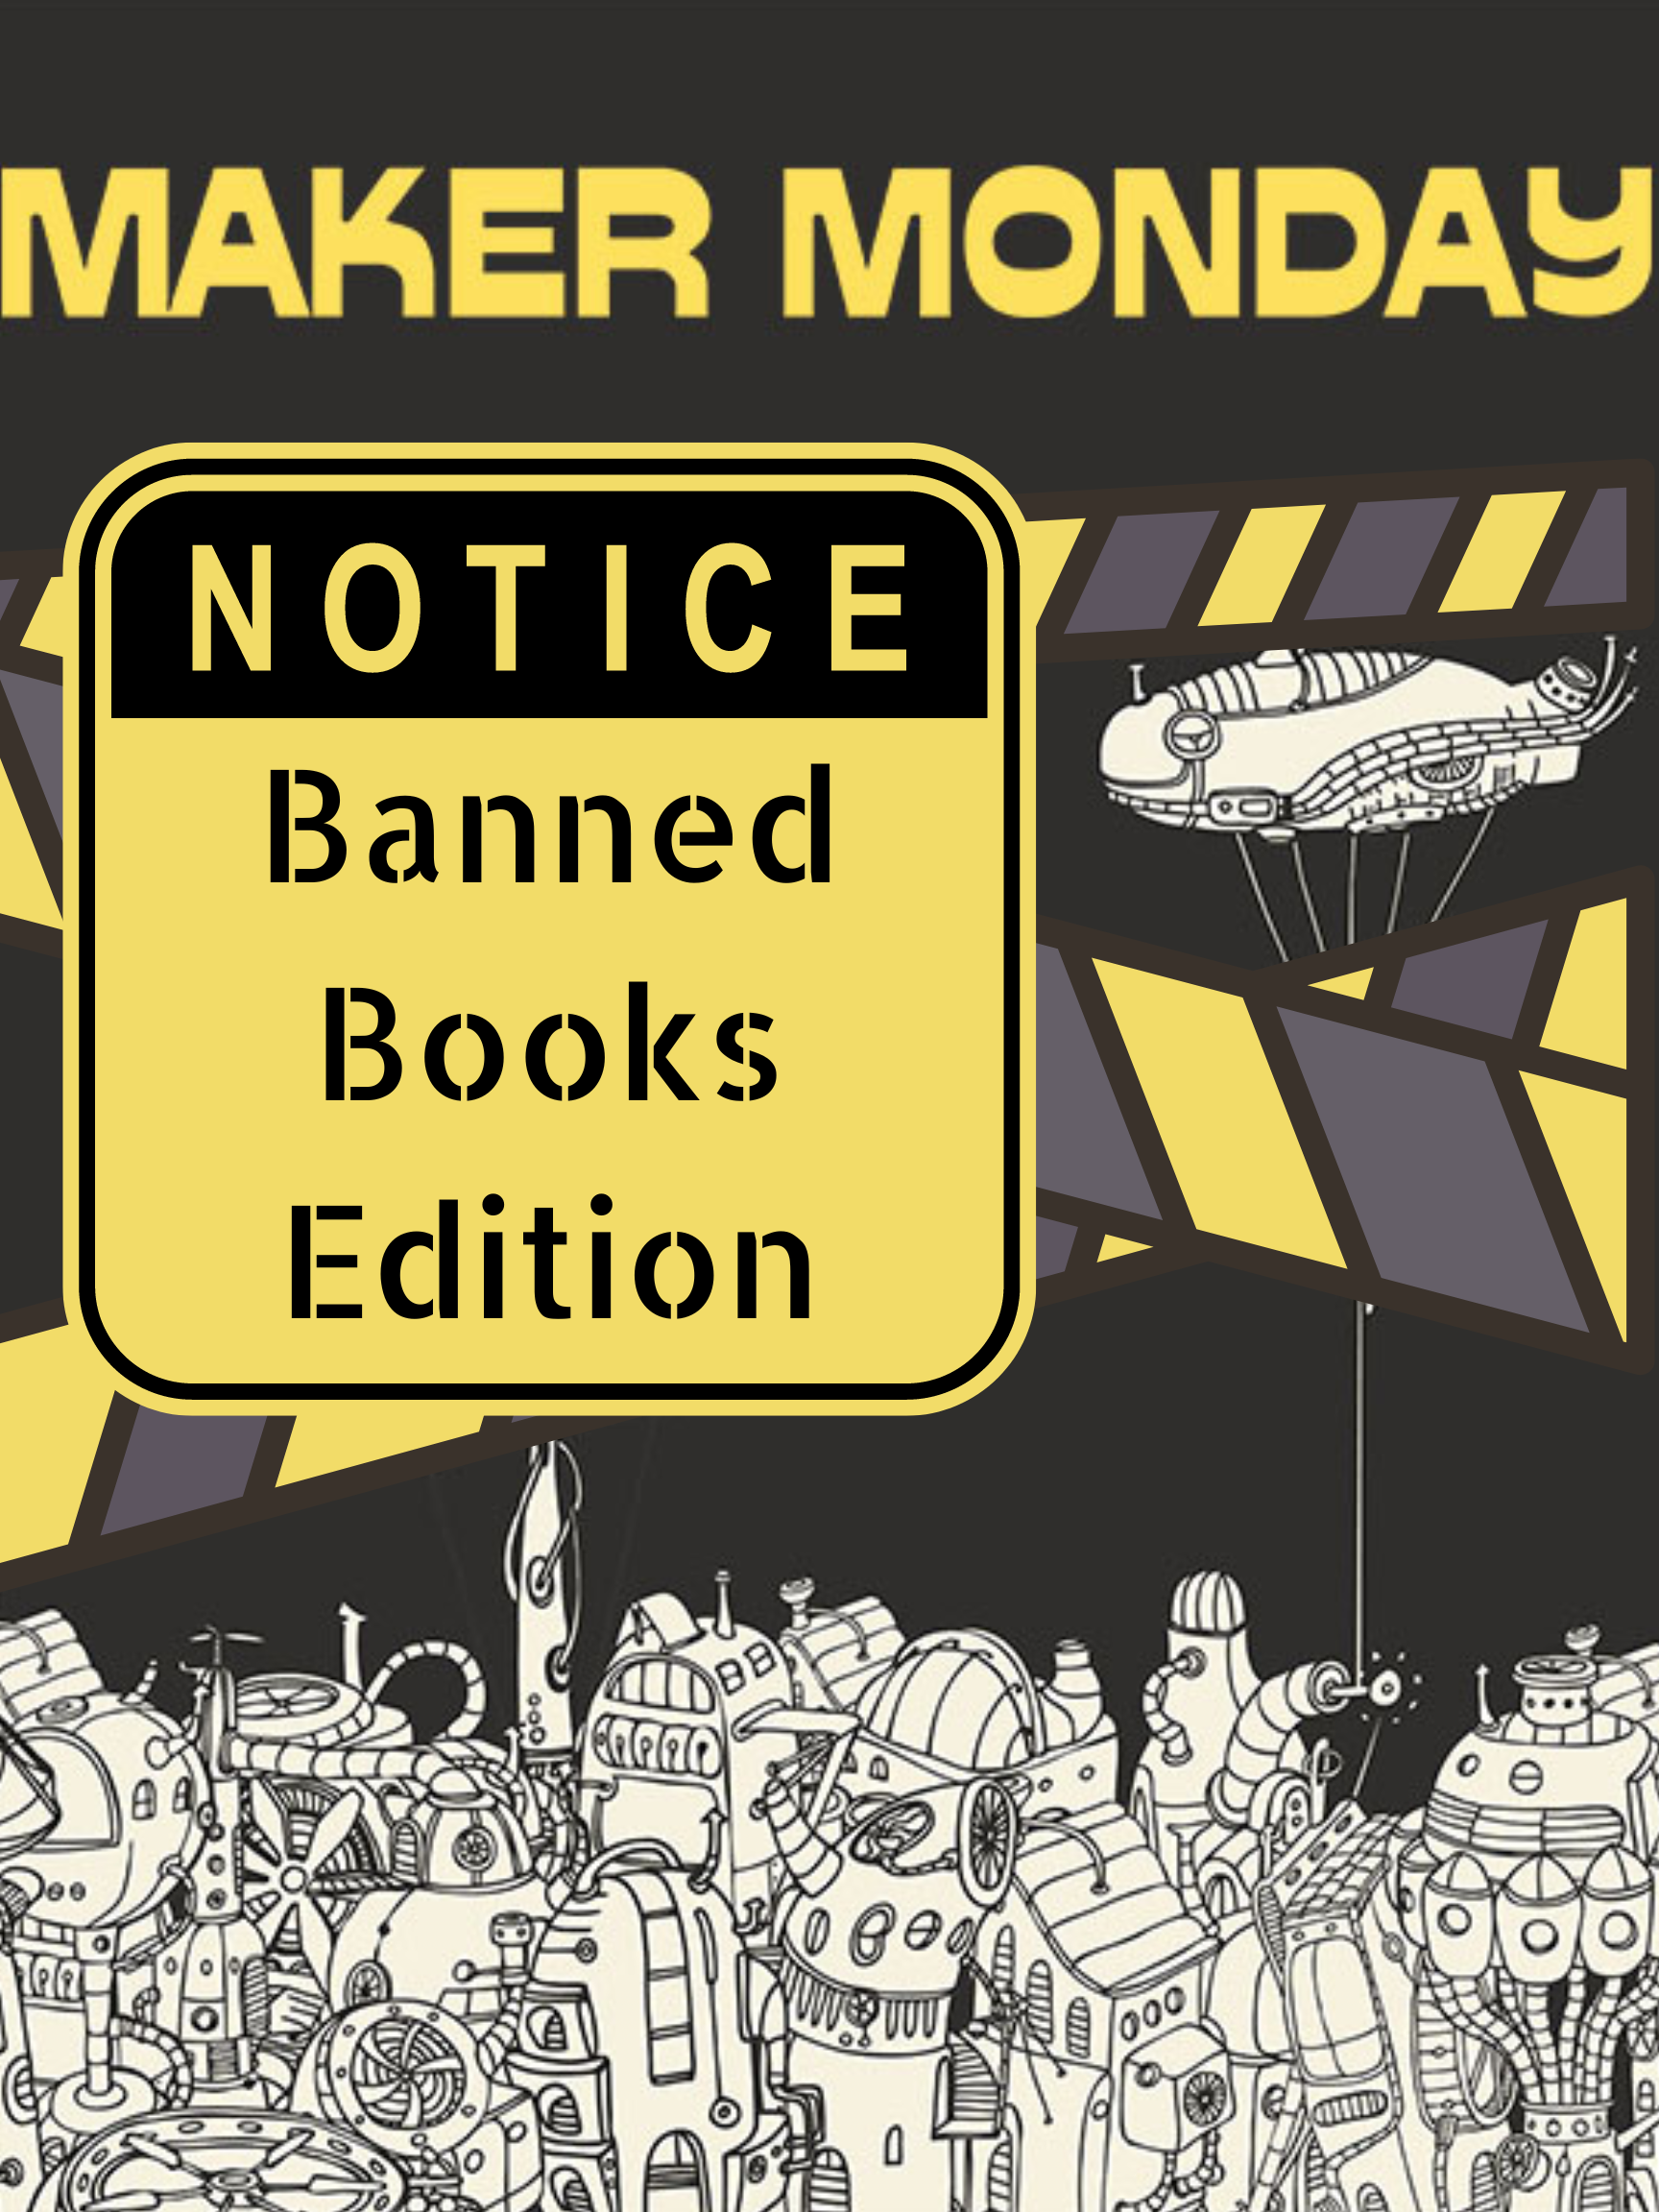 Maker Monday Banned Books Edition